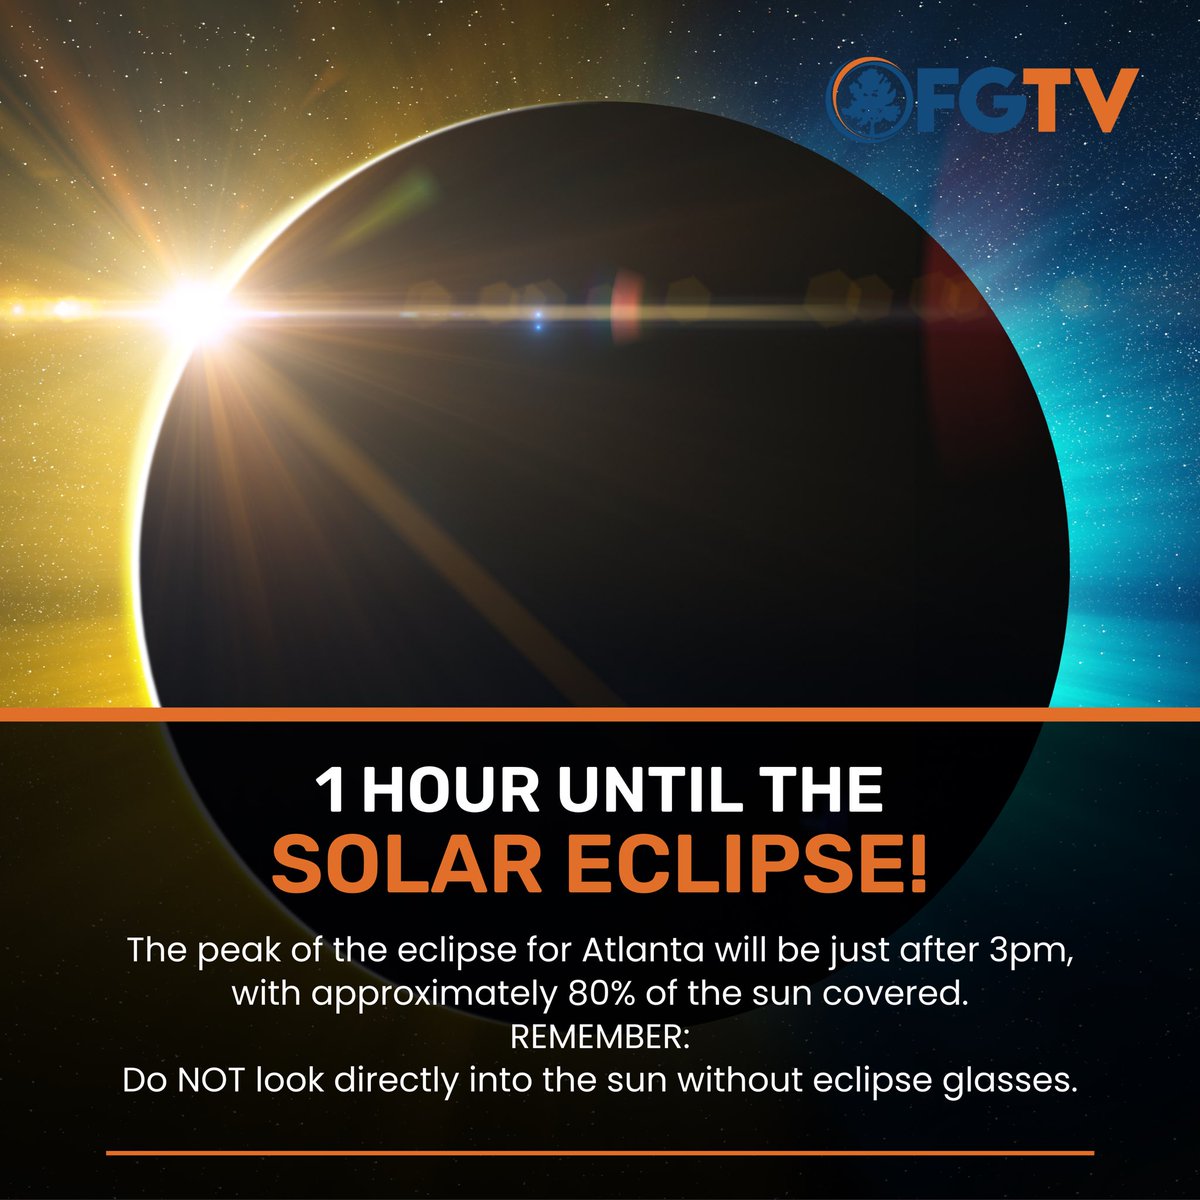 Are you ready for the #SolarEclipse? 🌔 Remember safety first! 🕶️